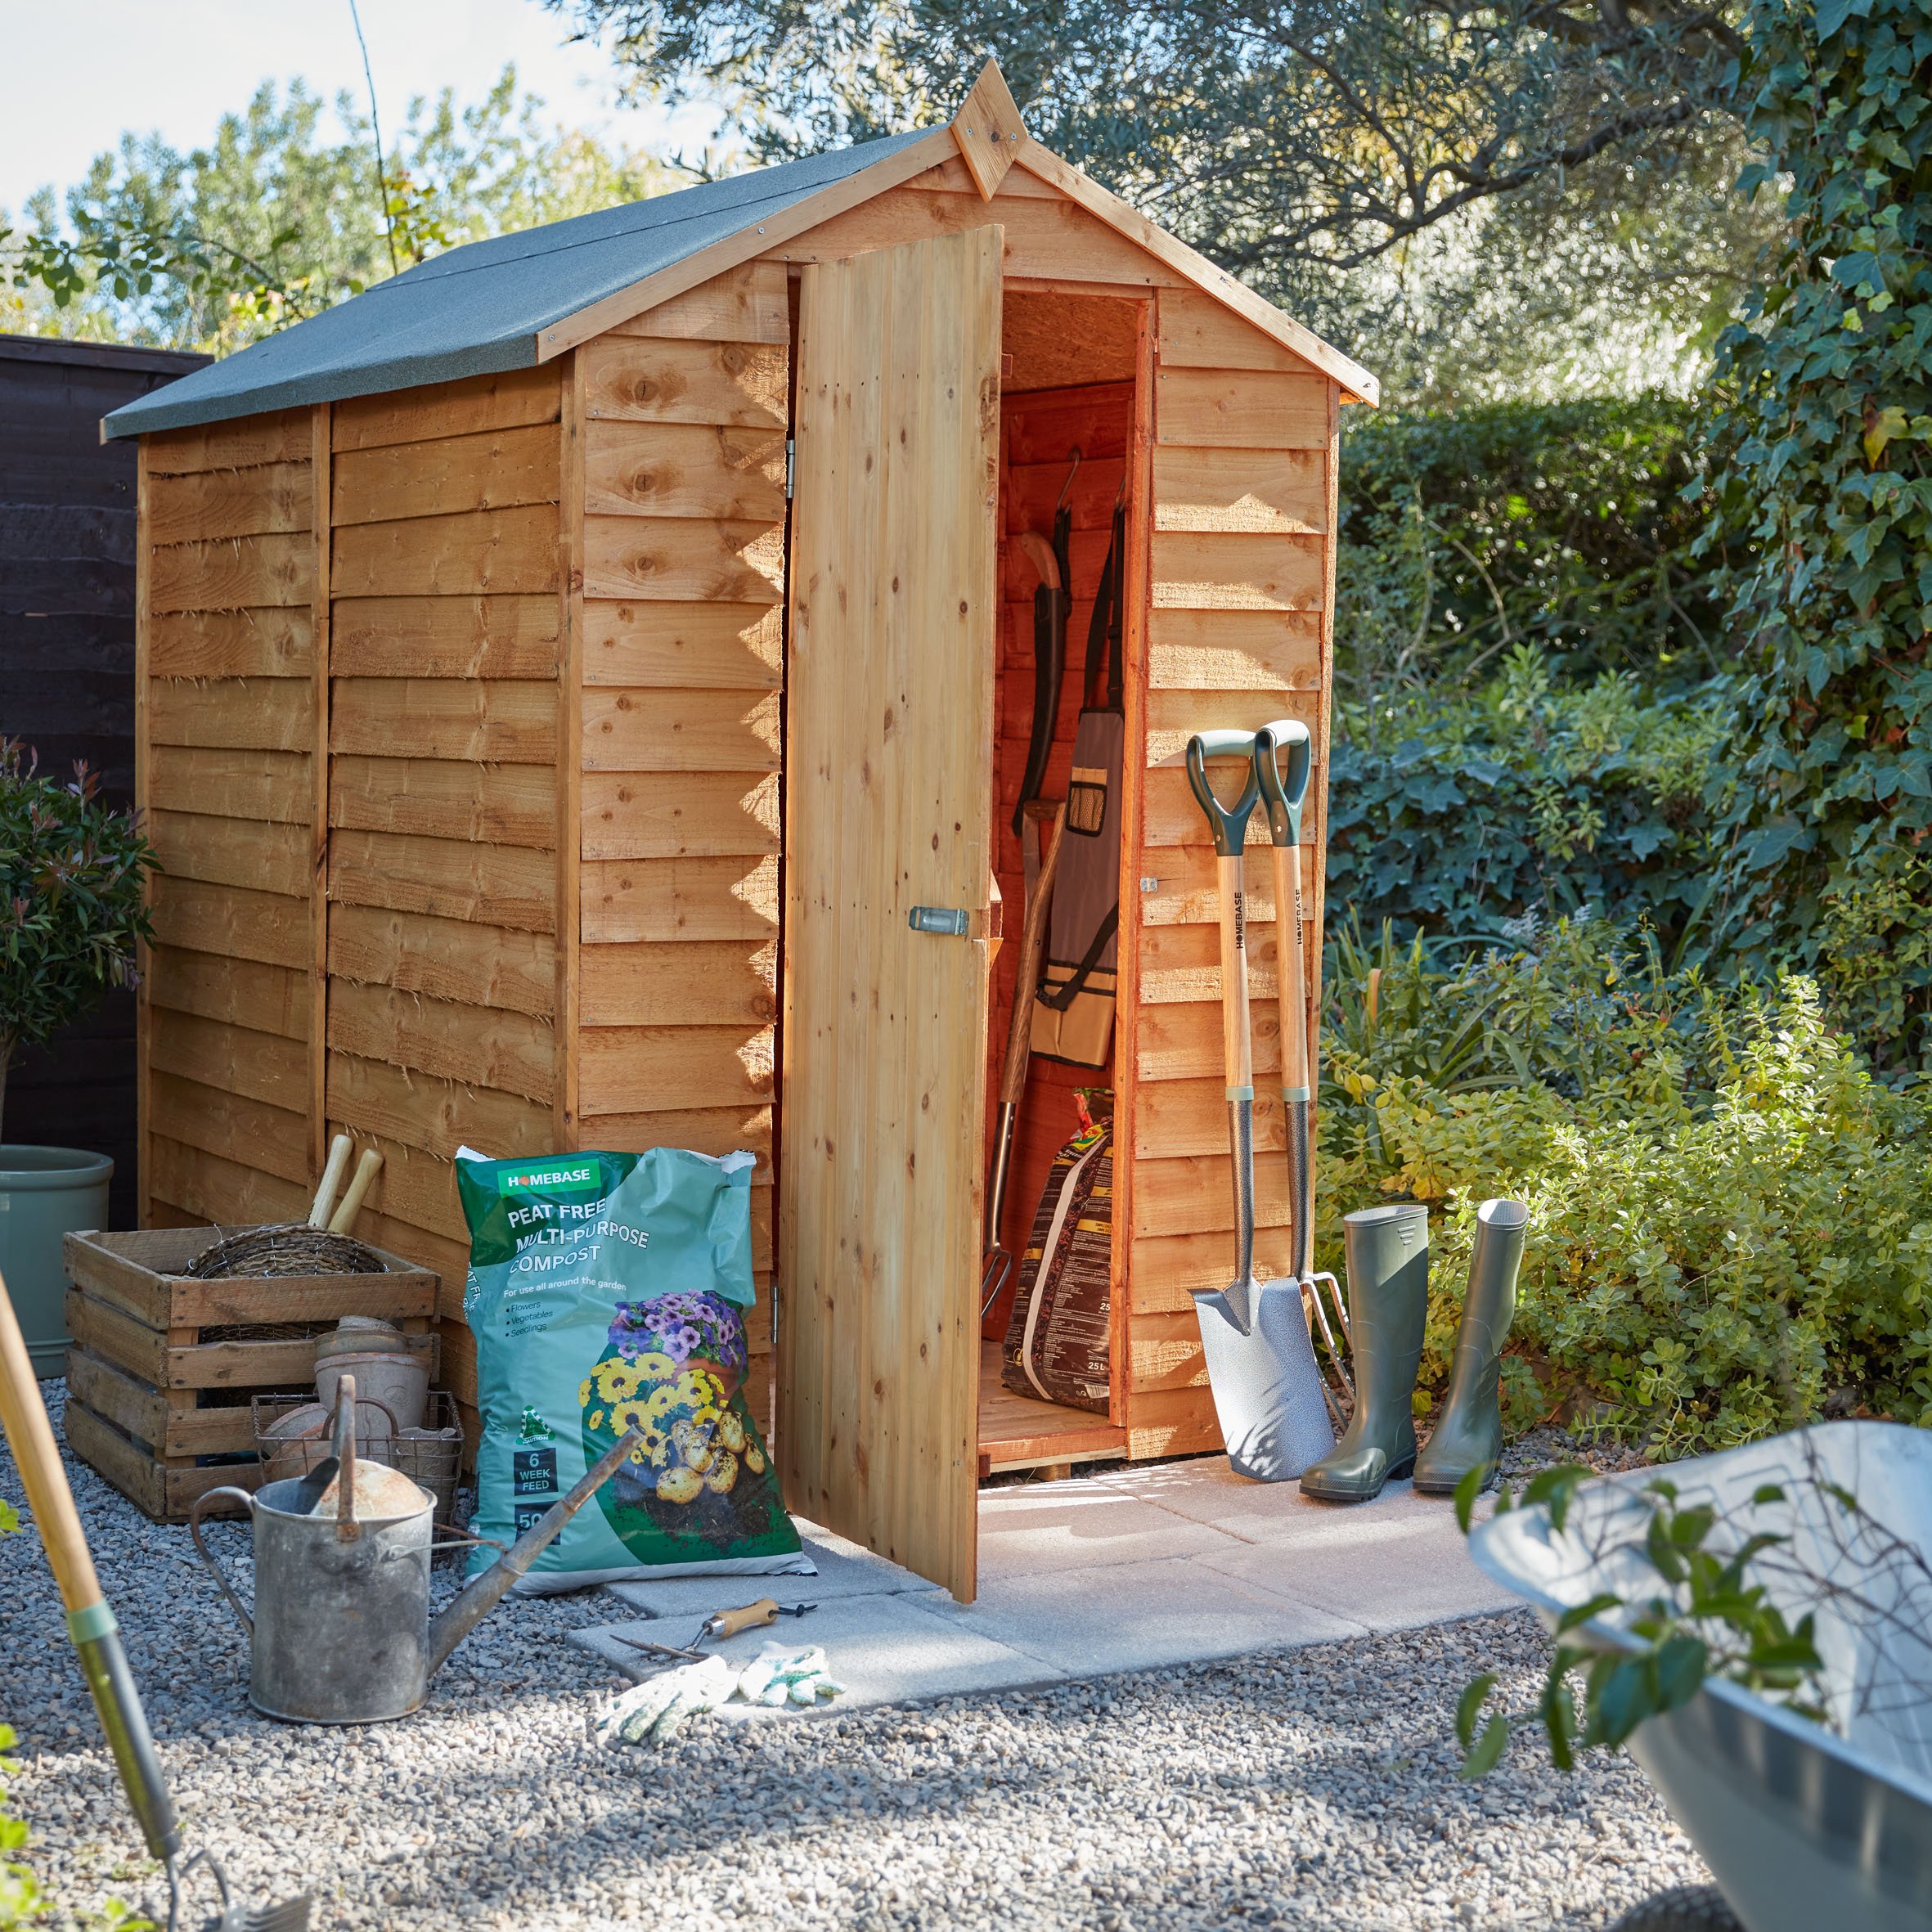 an image of an outdoor garden shed